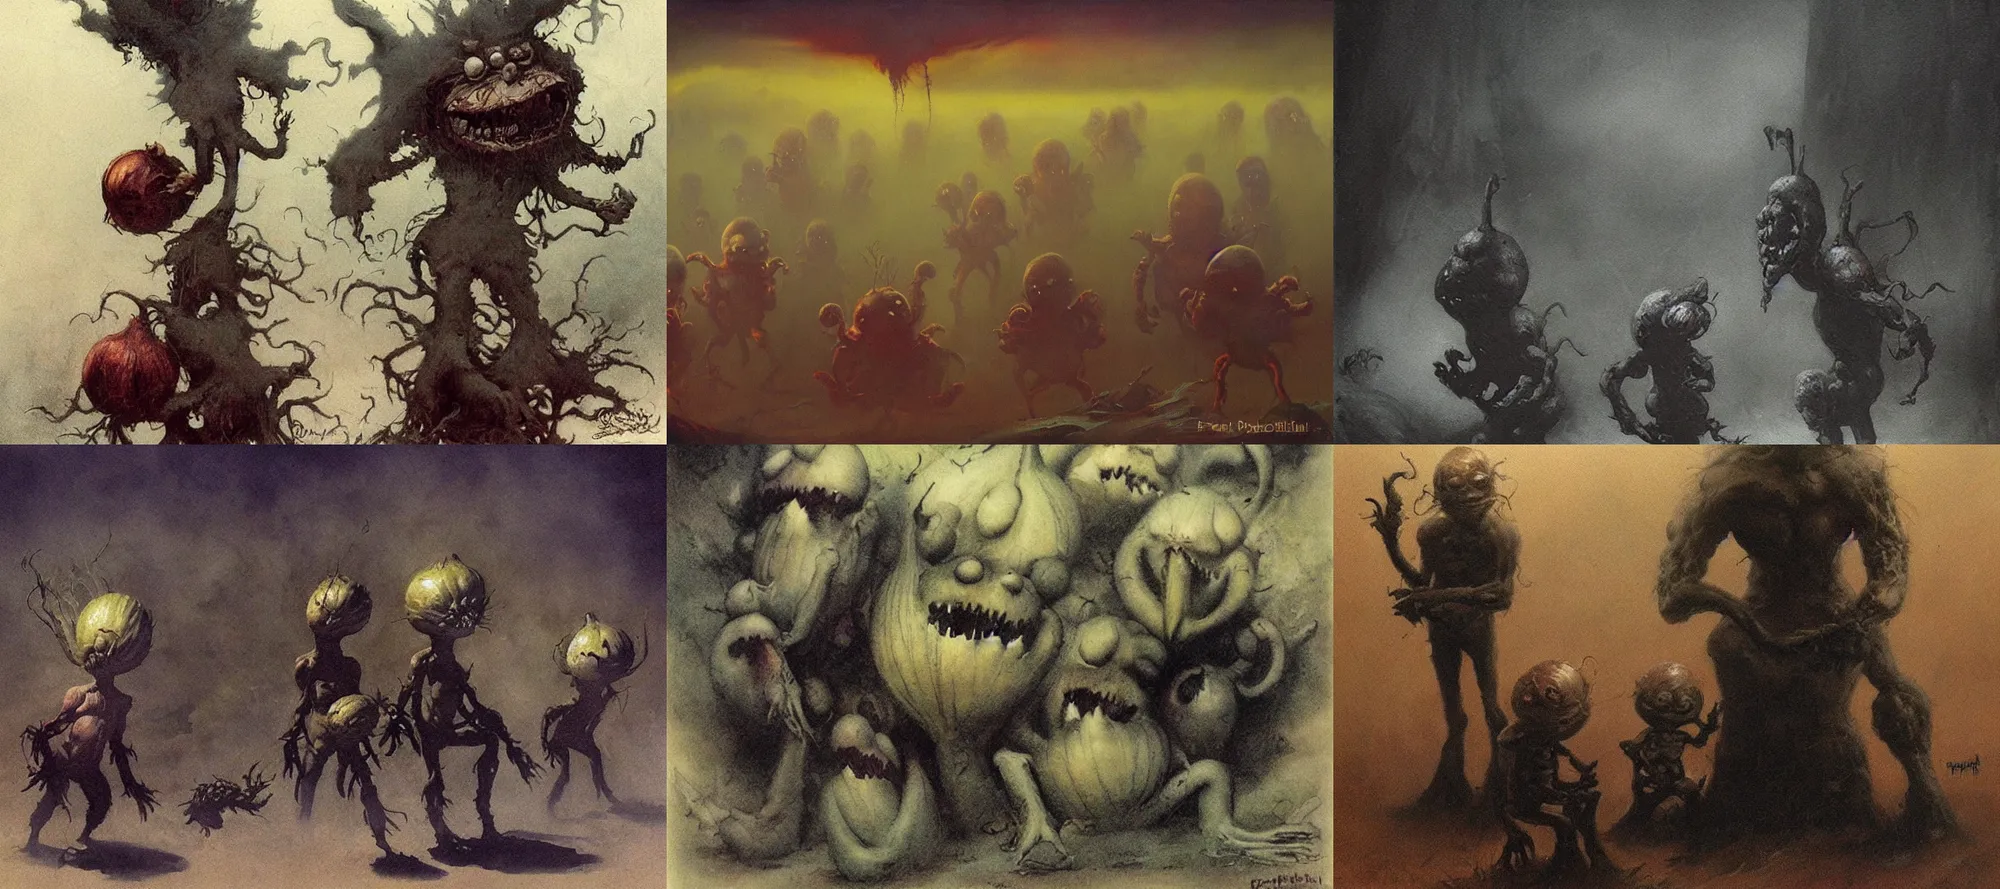 Prompt: onion creatures within the fog by Frank Frazetta, creepy, atmospheric, shadowy onions, liminal